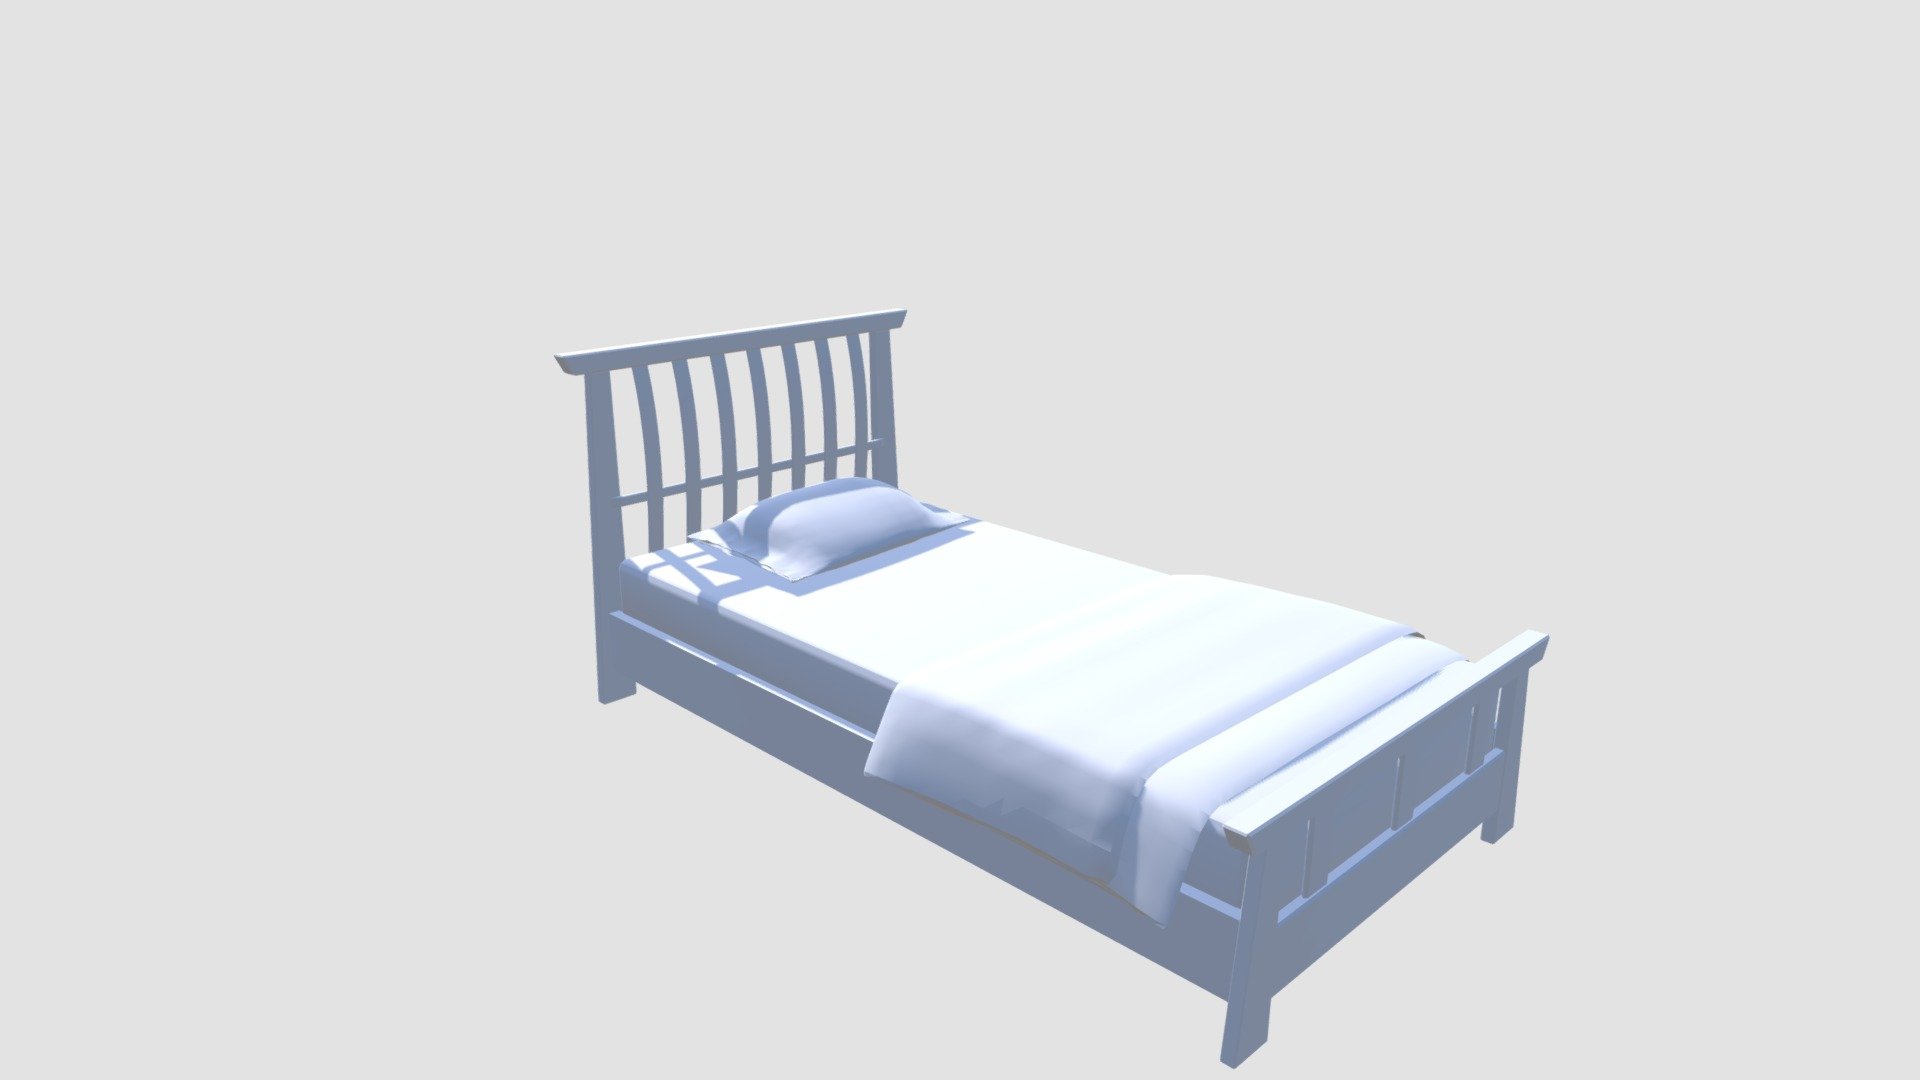 Highly detailed model of bed with all textures, shaders and materials. It is ready to use, just put it into your scene 3d model